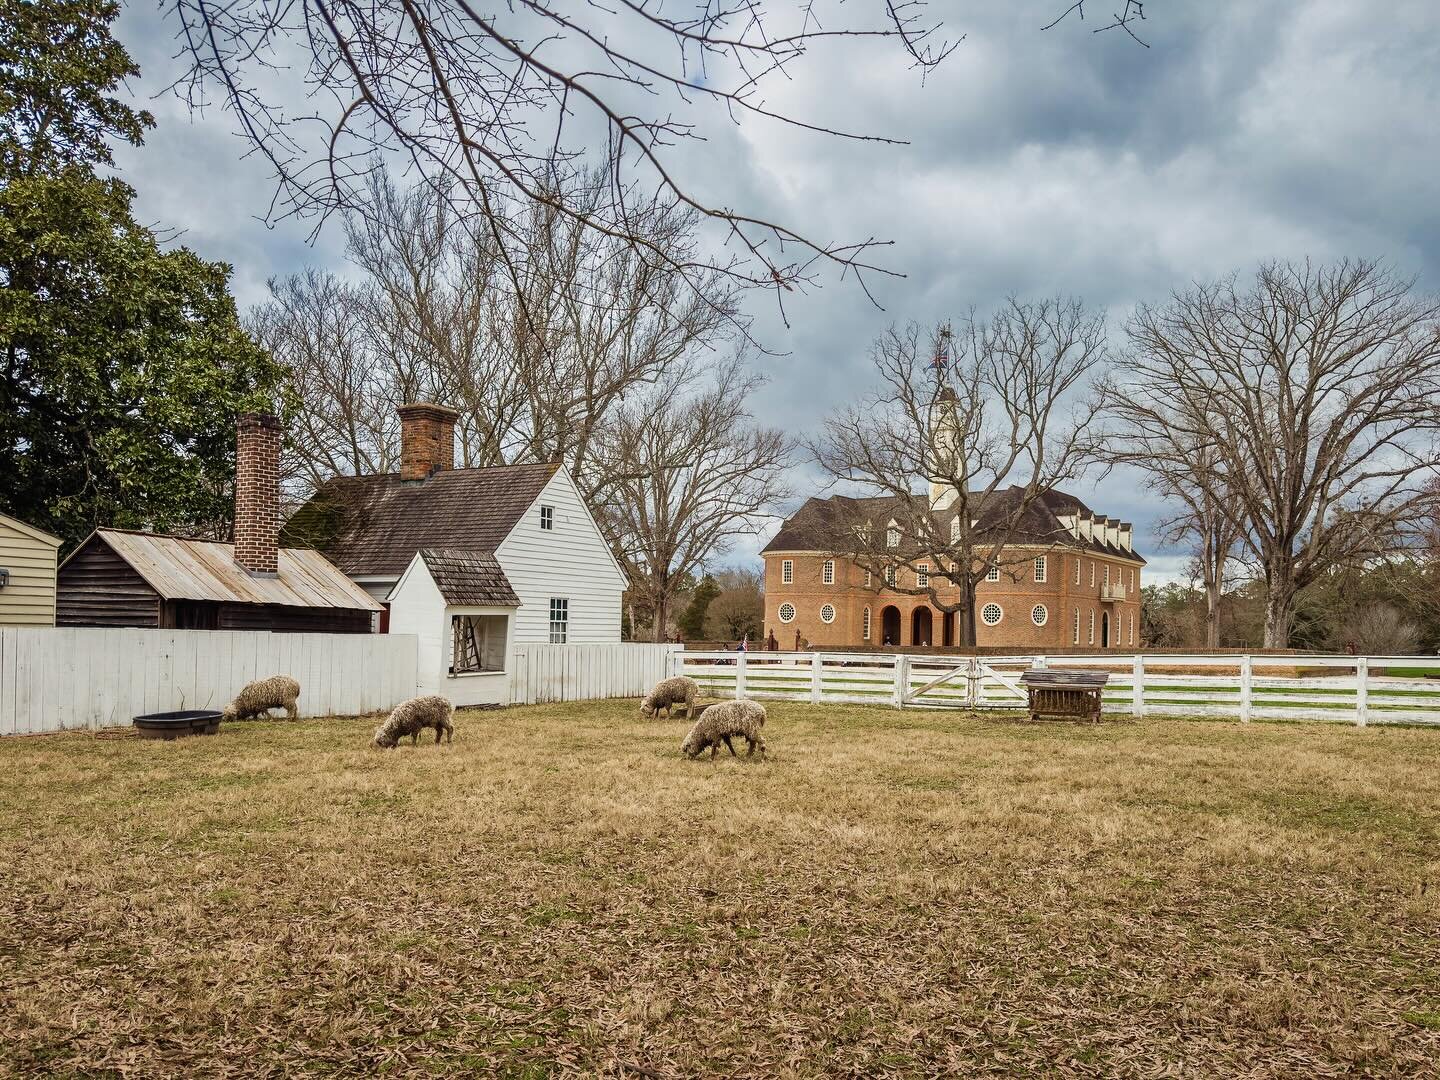 Late winter in Colonial Williamsburg